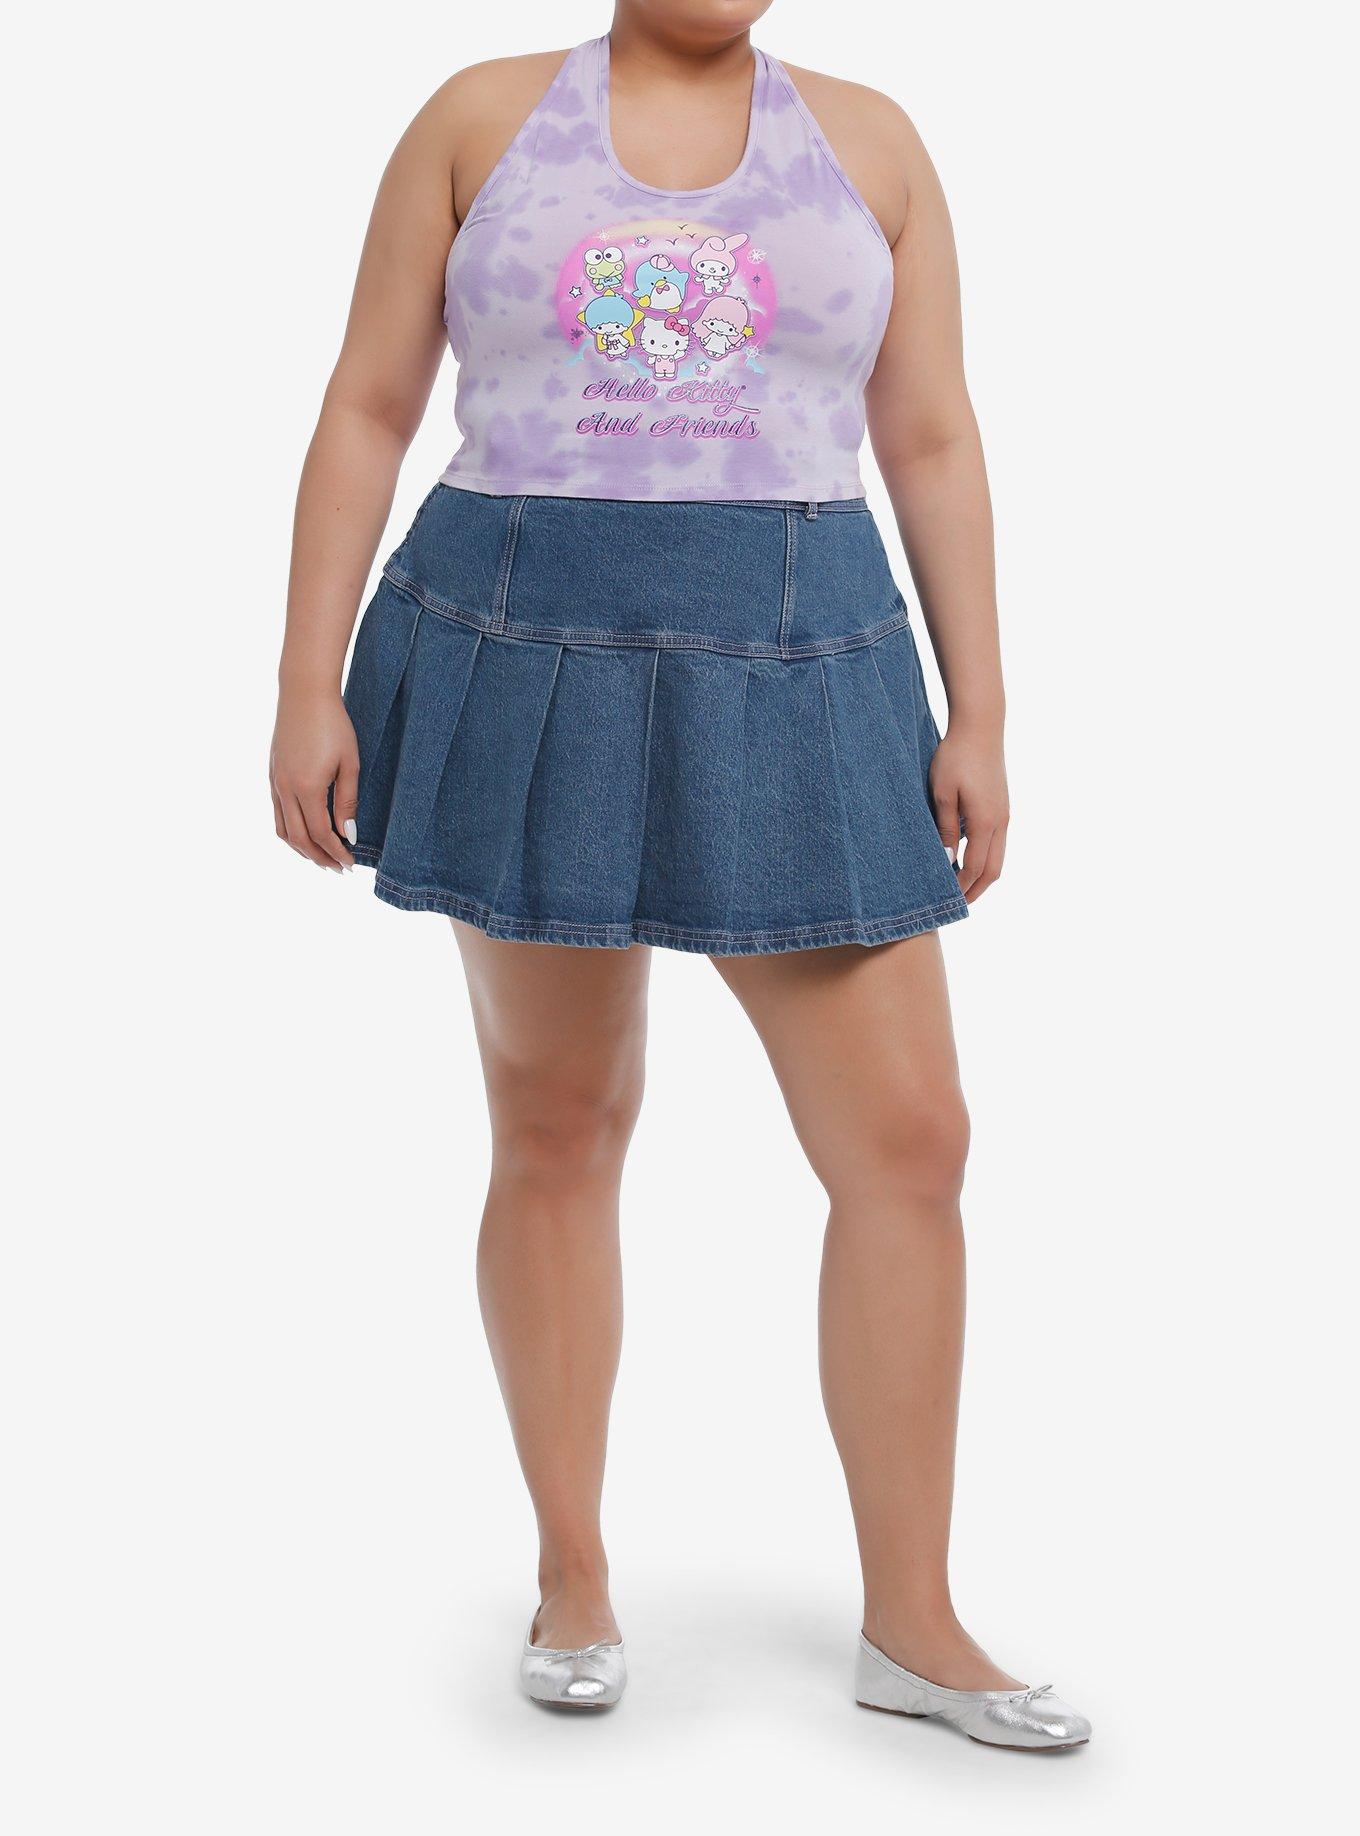 Hello Kitty And Friends Group Tie-Dye Girls Halter Top Plus